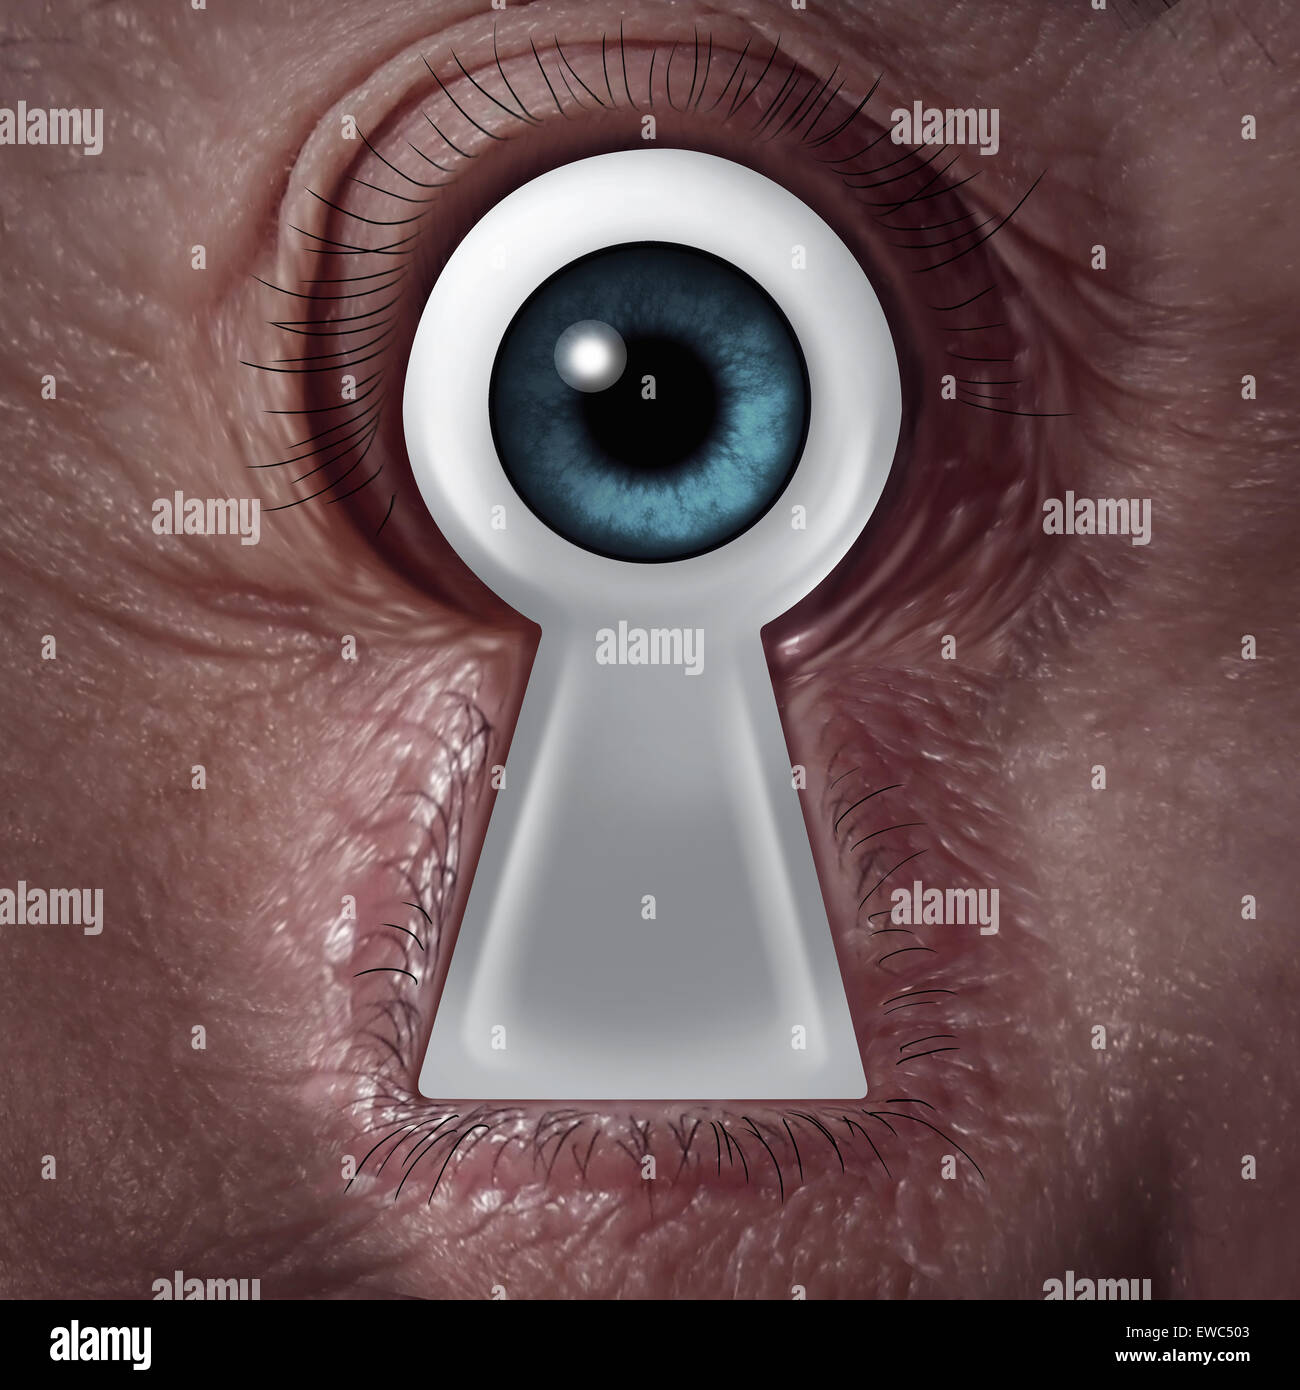 Key vision concept as a human eye shaped as a keyhole symbol as a business metaphor for finding the solution from within and being a visionary of innovation and security. Stock Photo